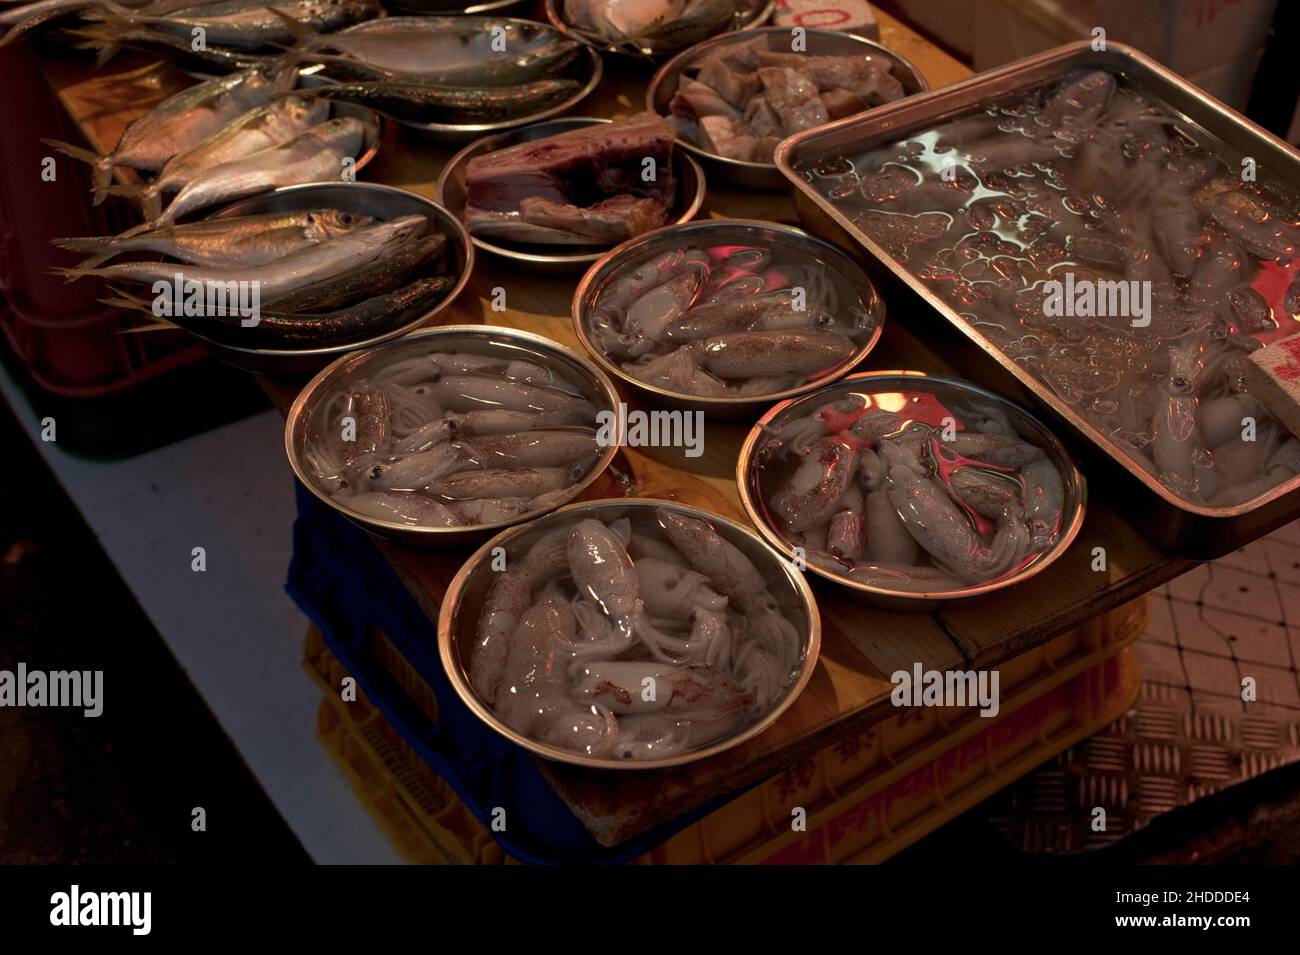 Squid and various fish are displayed in containers of ice water at a seafood stall in Hong Kong. Stock Photo